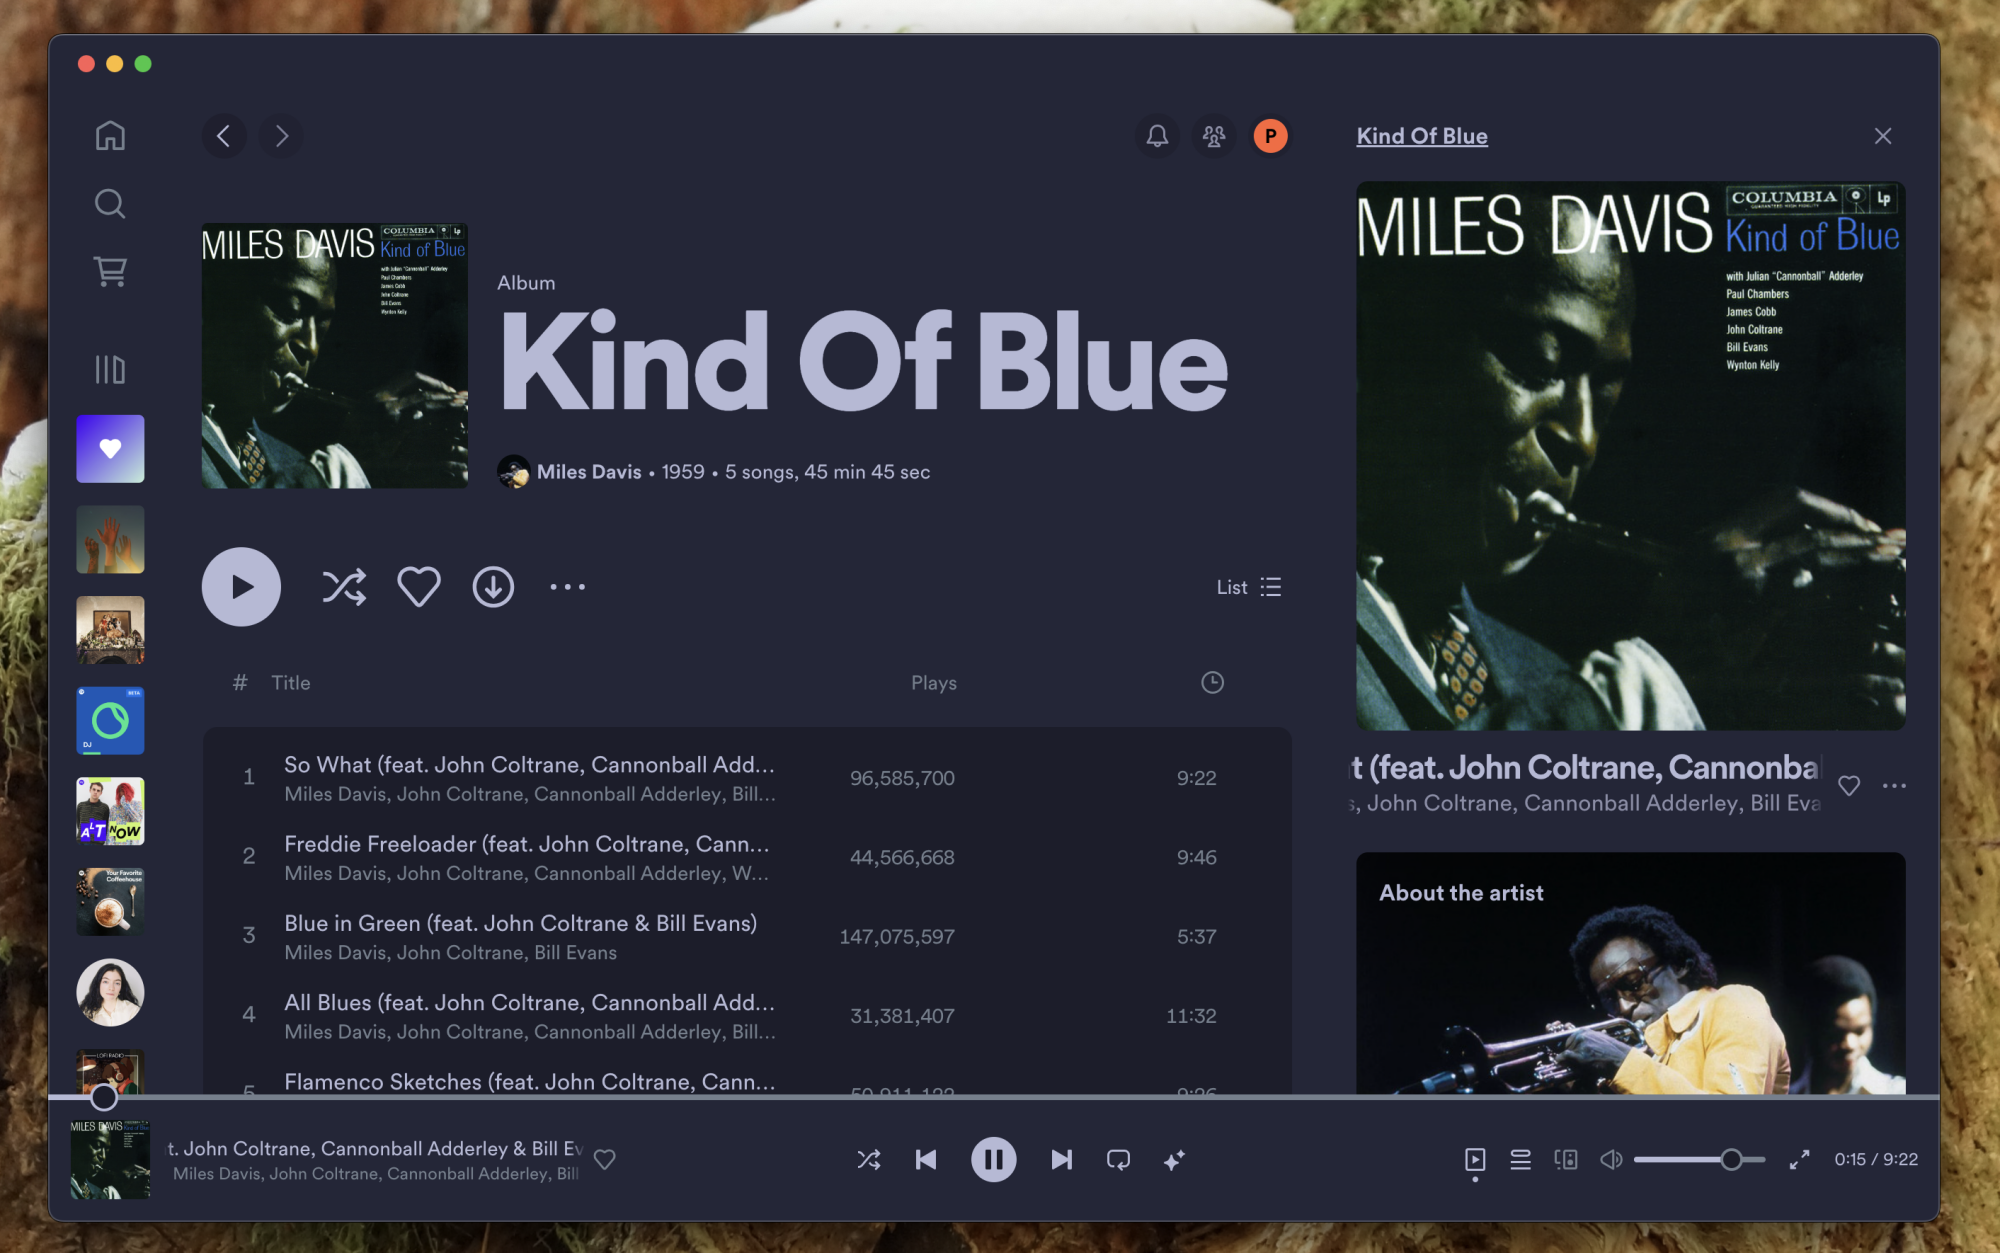 A screenshot of Spotify with a blue theme playing "Kind of Blue" by Miles Davis